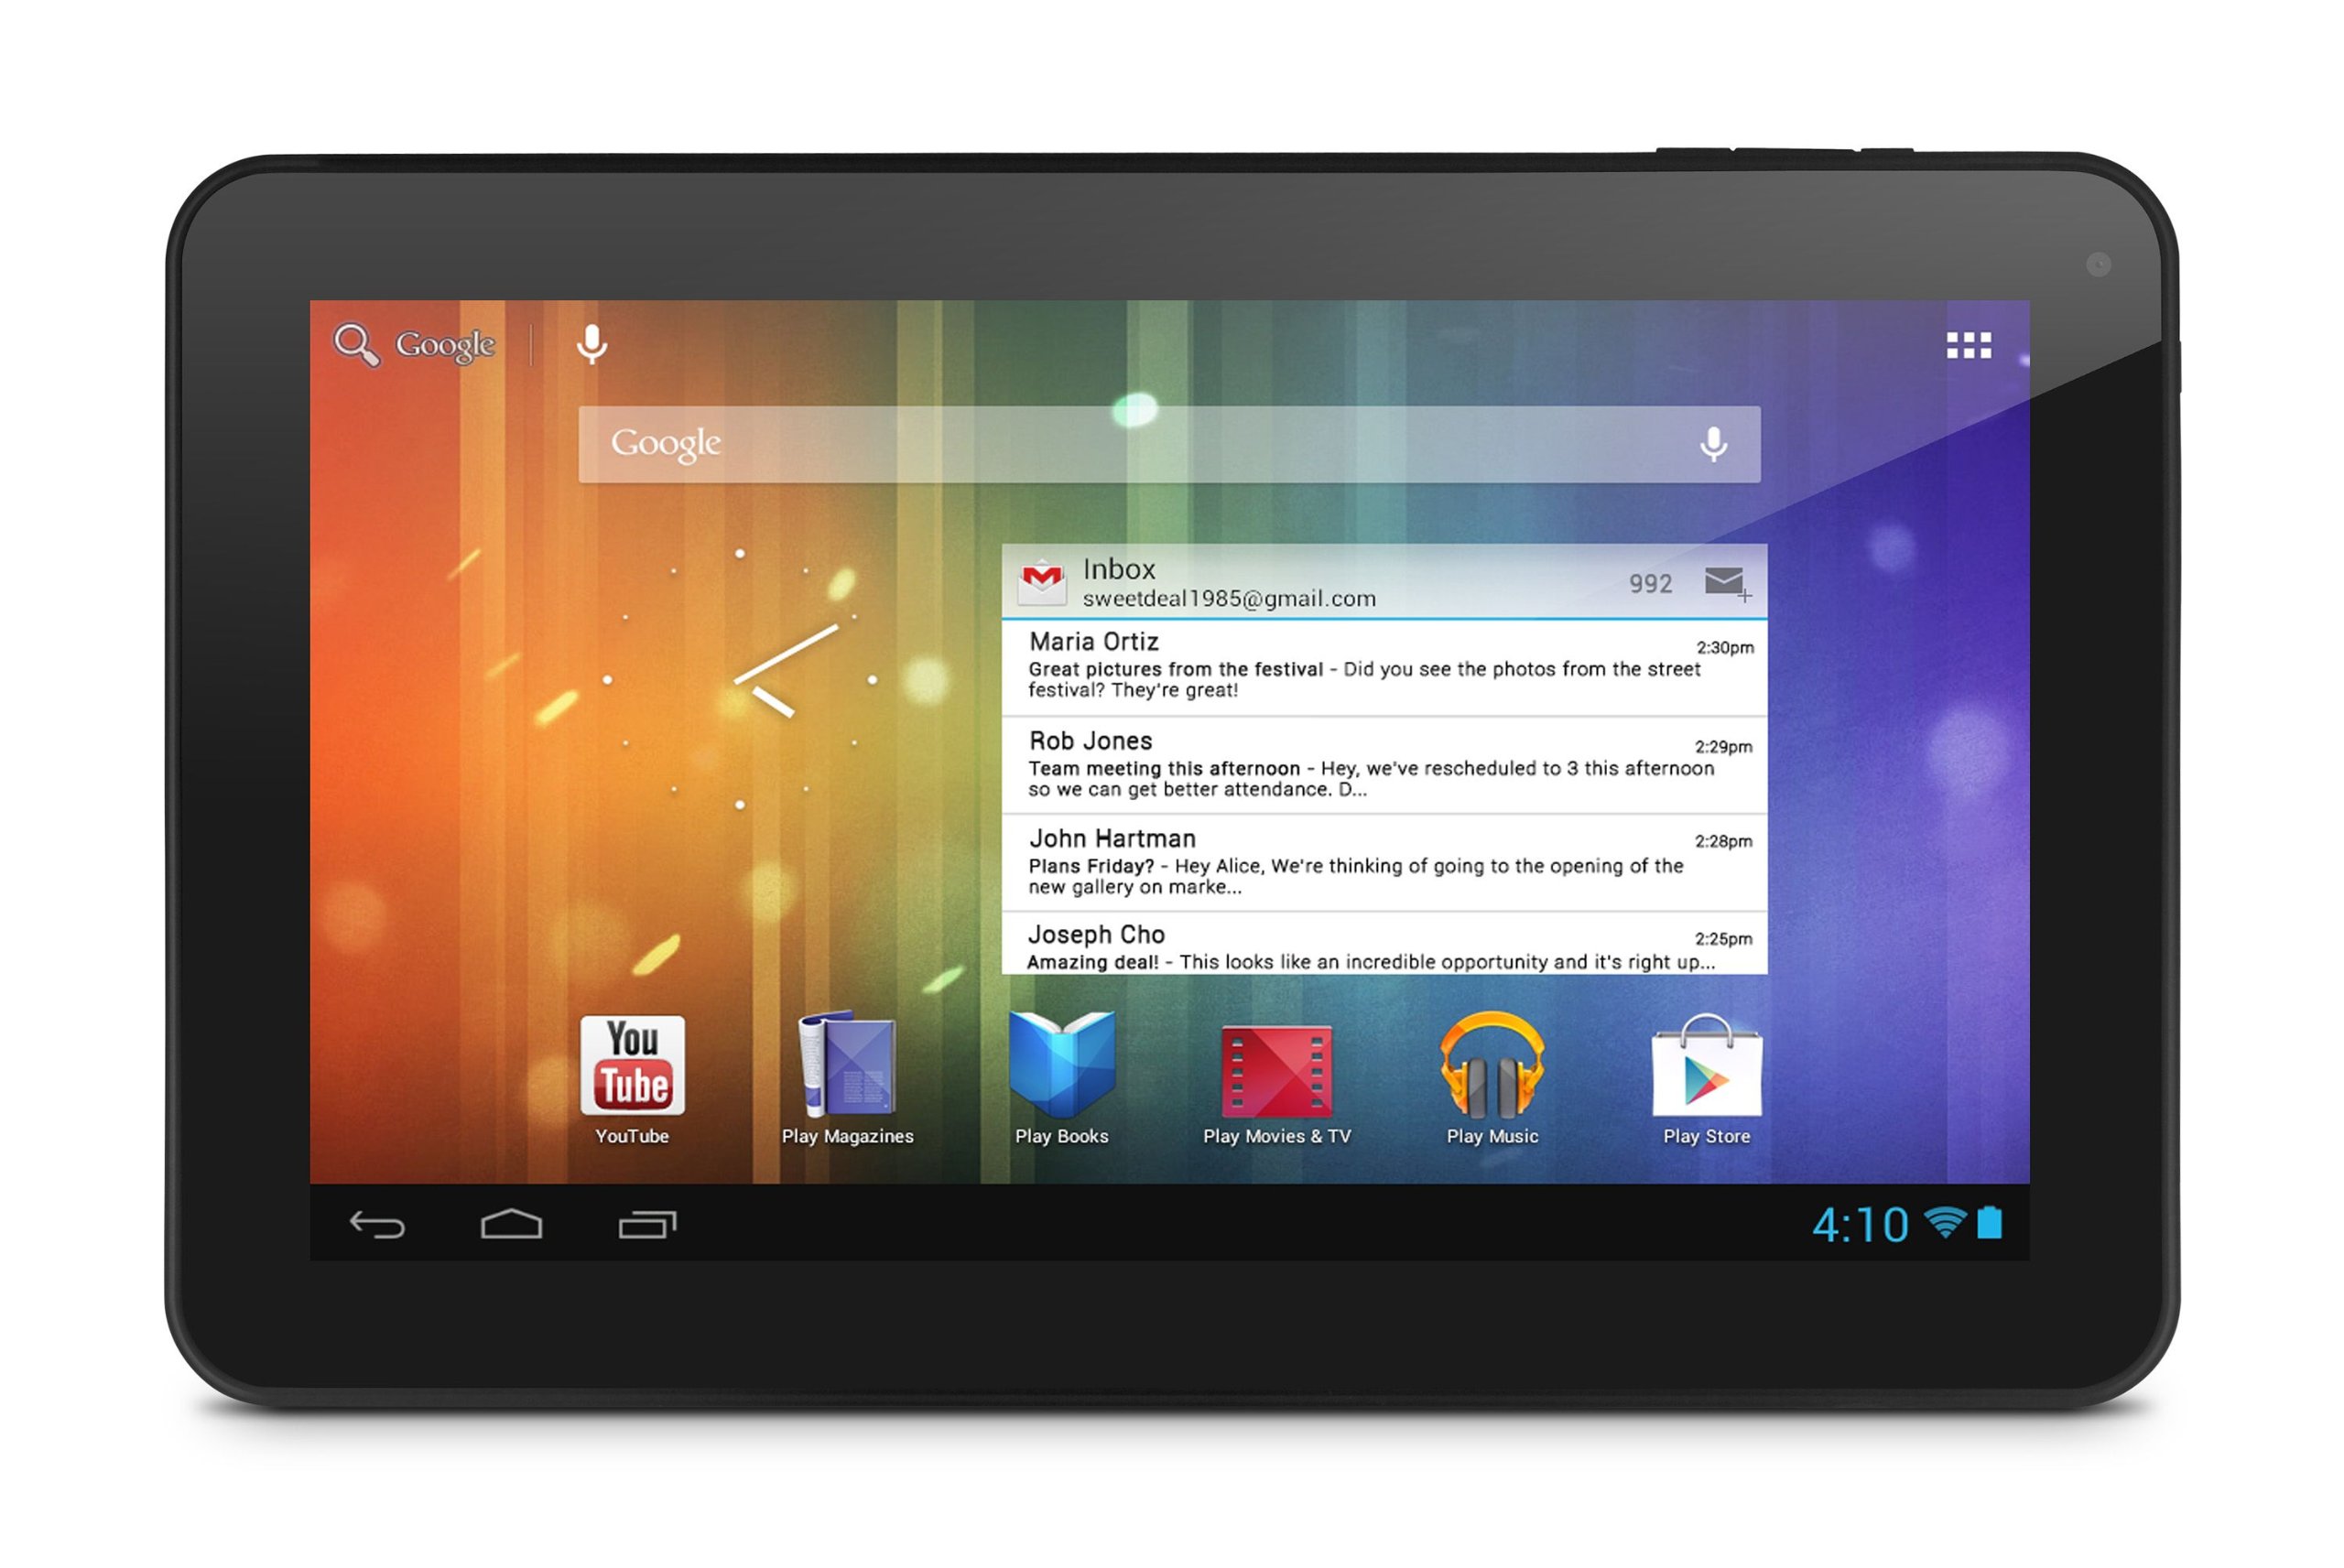 Ematic XL Multi-Touch Genesis Prime 10-inch Android 4.1 Jellybean 4GB Tablet, Black